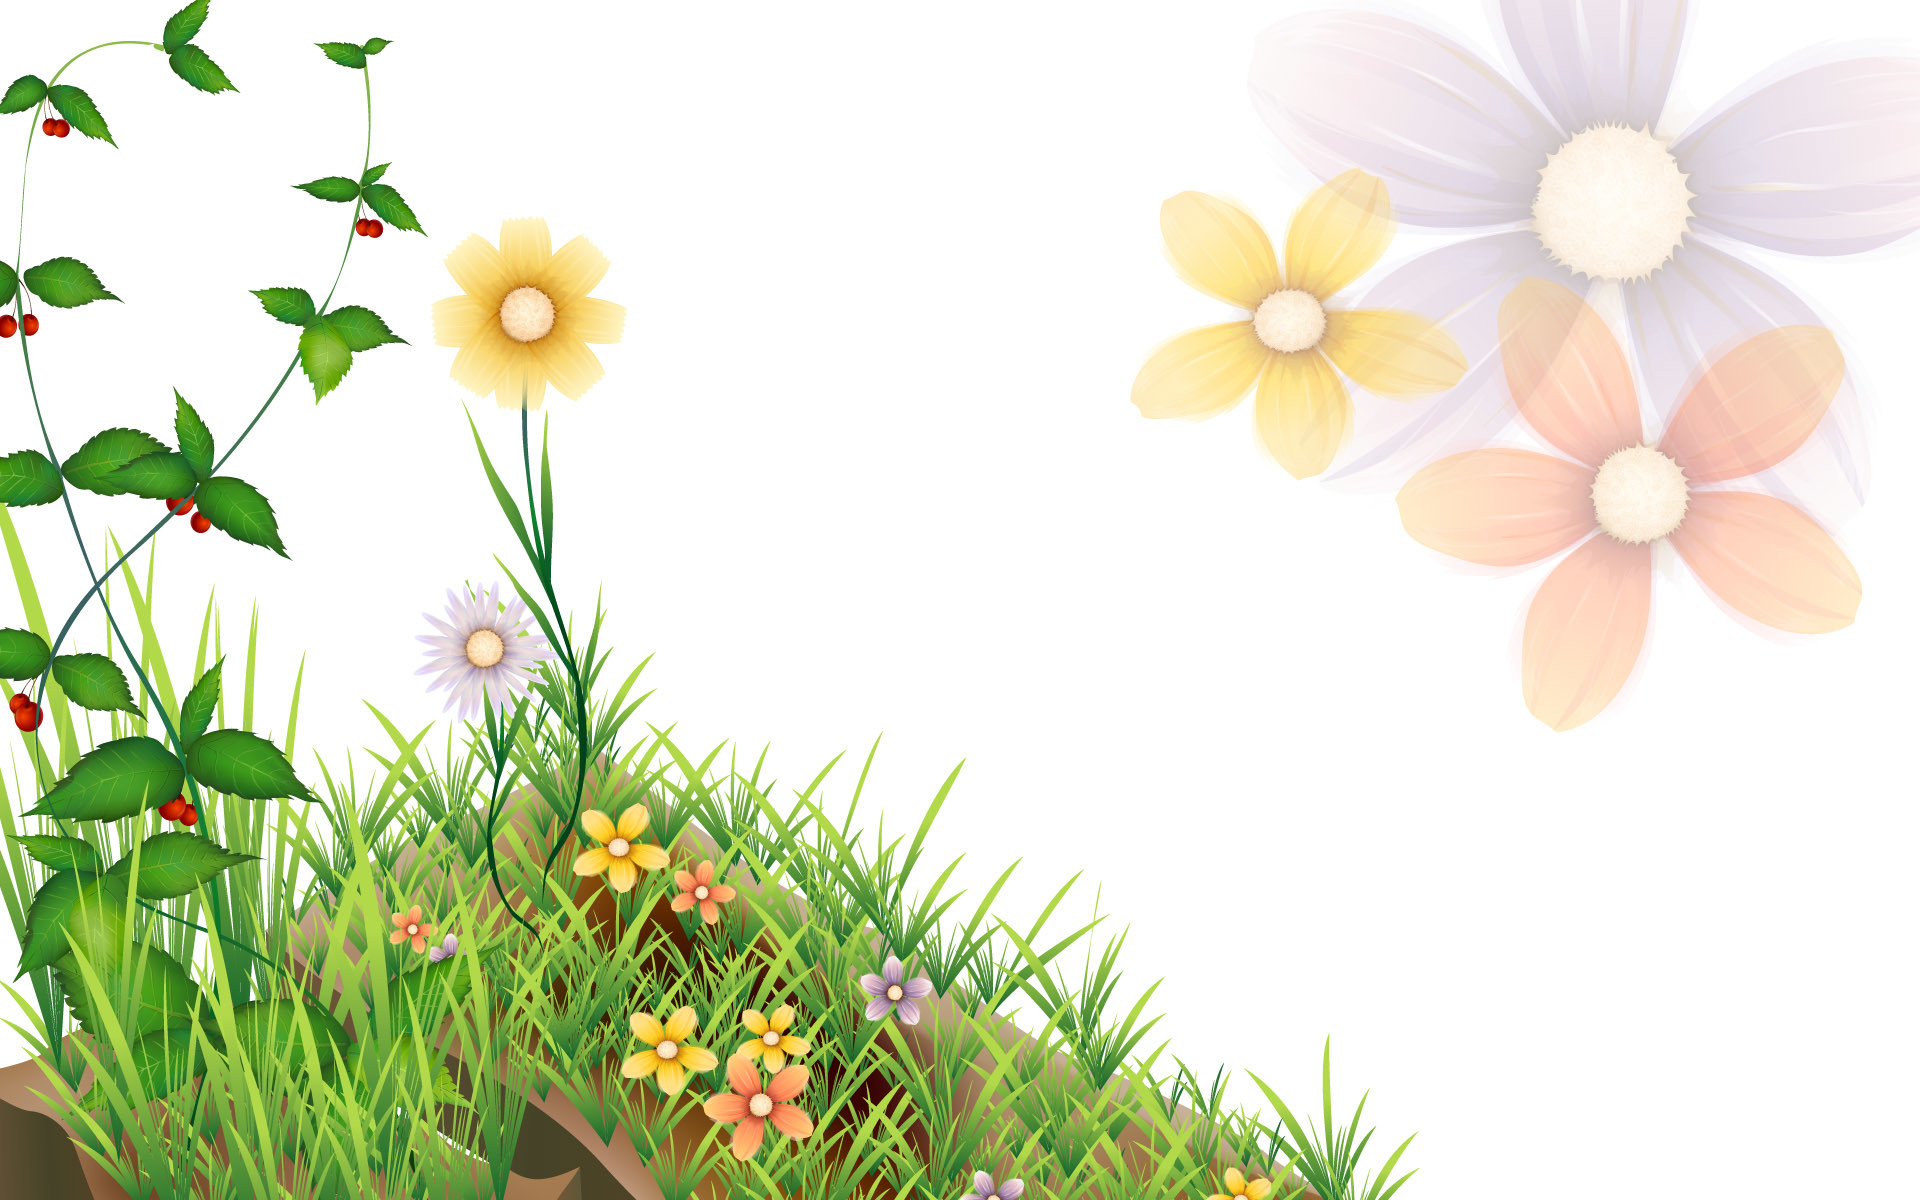 1920x1200 Most beautiful nature clipart backgrounds uploaded by the best user